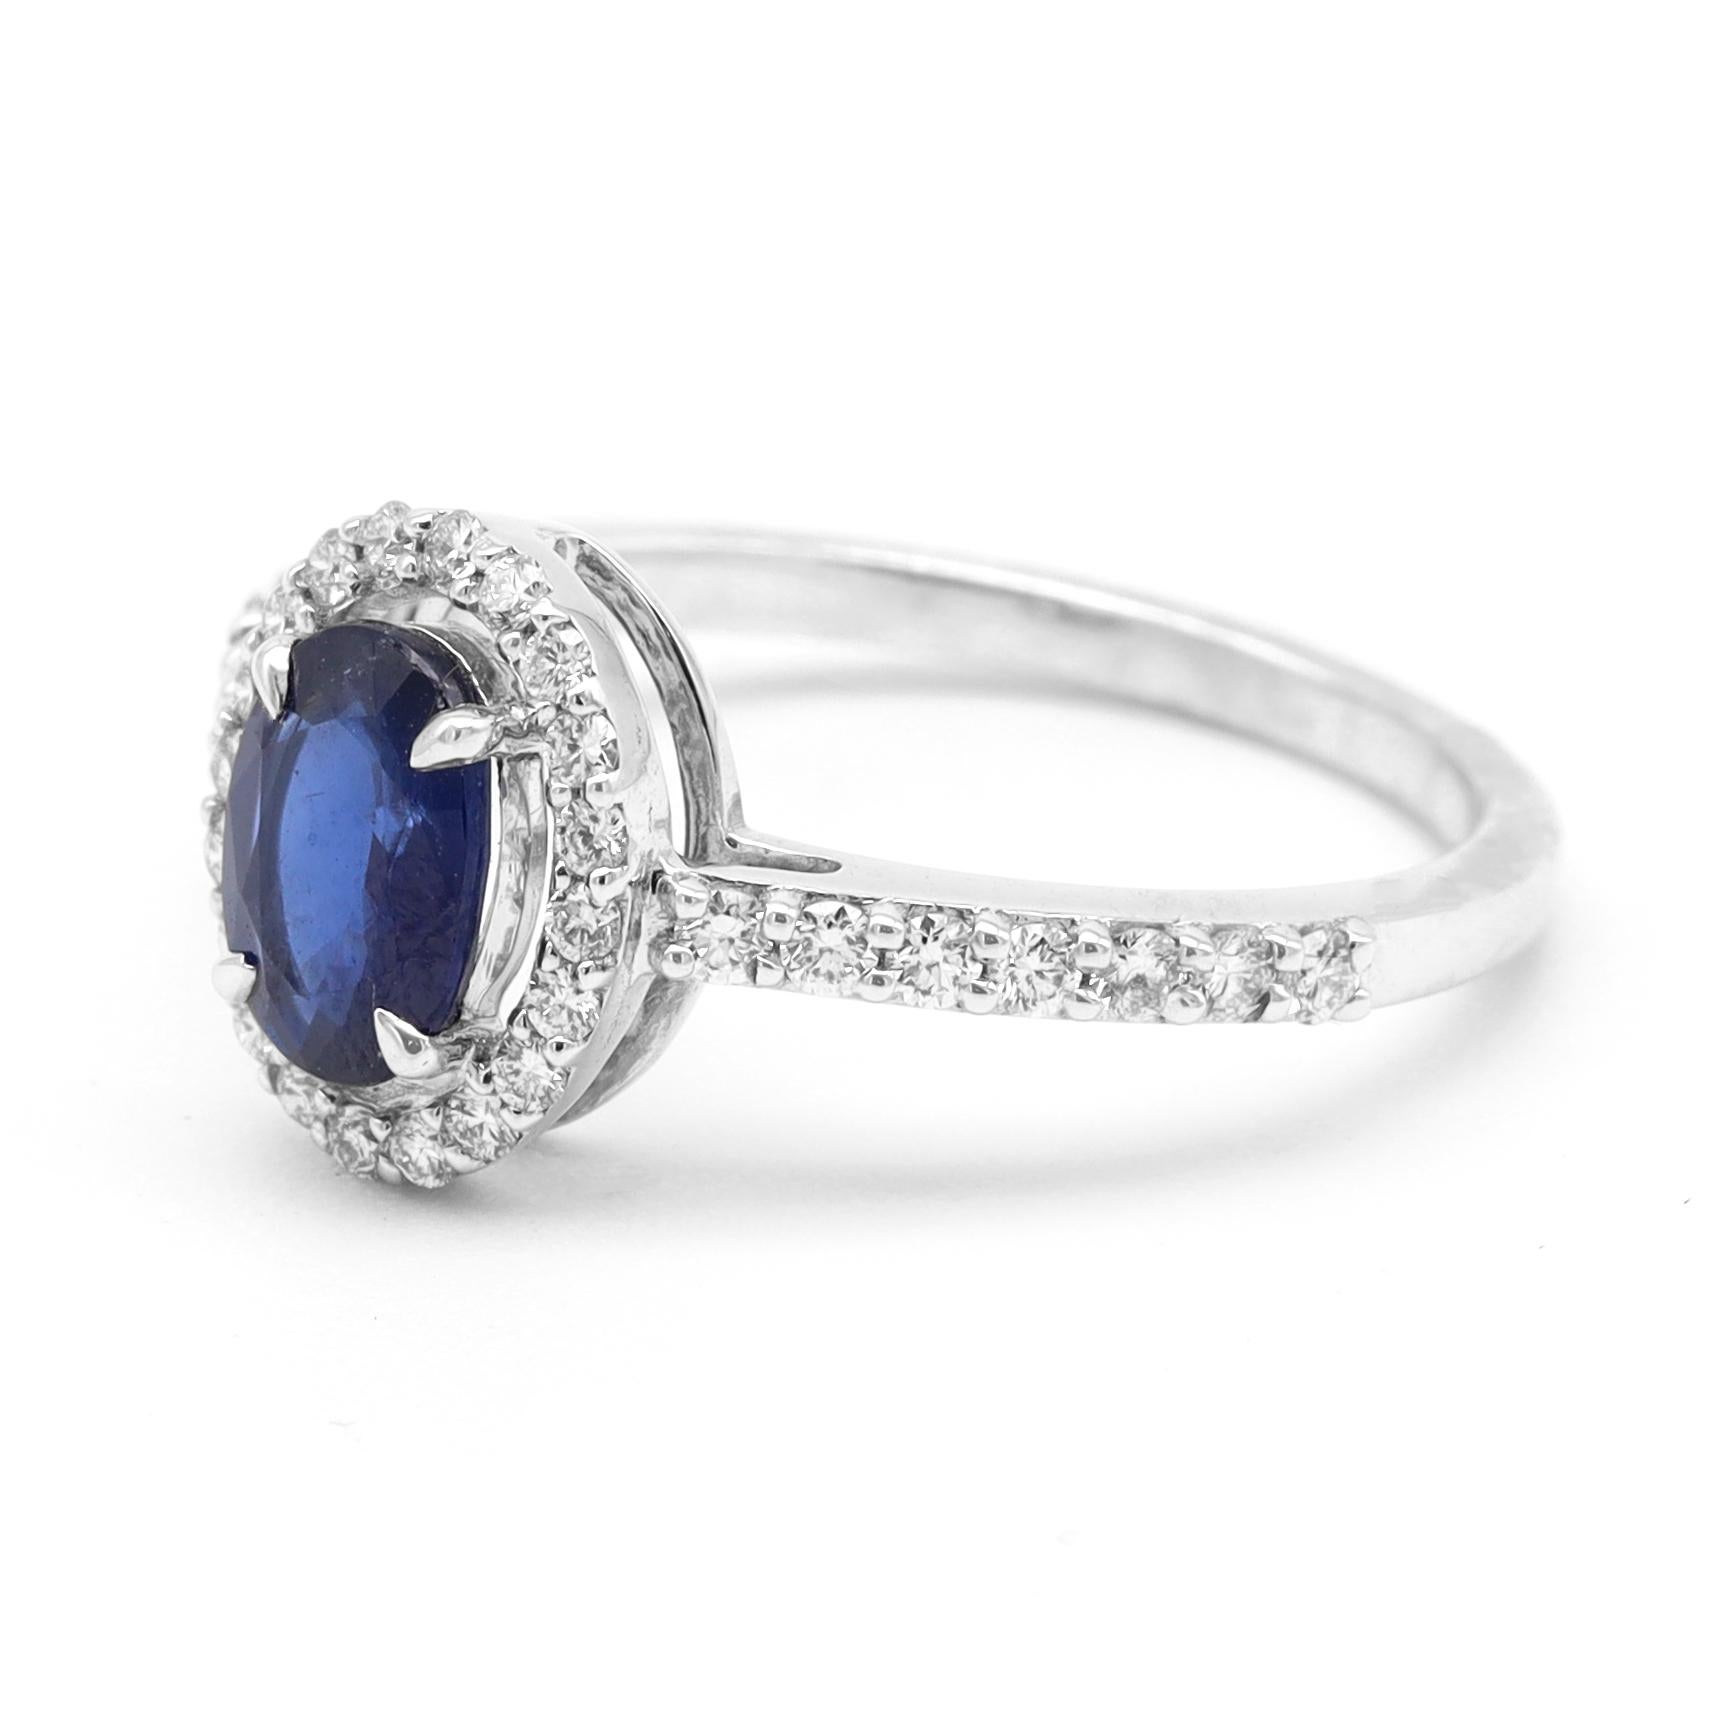 18 Karat White Gold 1.00 Carat Blue Sapphire and Diamond Halo Cluster Ring

This classic royal blue sapphire and diamond halo ring is palatial. The midnight blue sapphire oval prong-set is surrounded with the evenly gaped single row of grain set